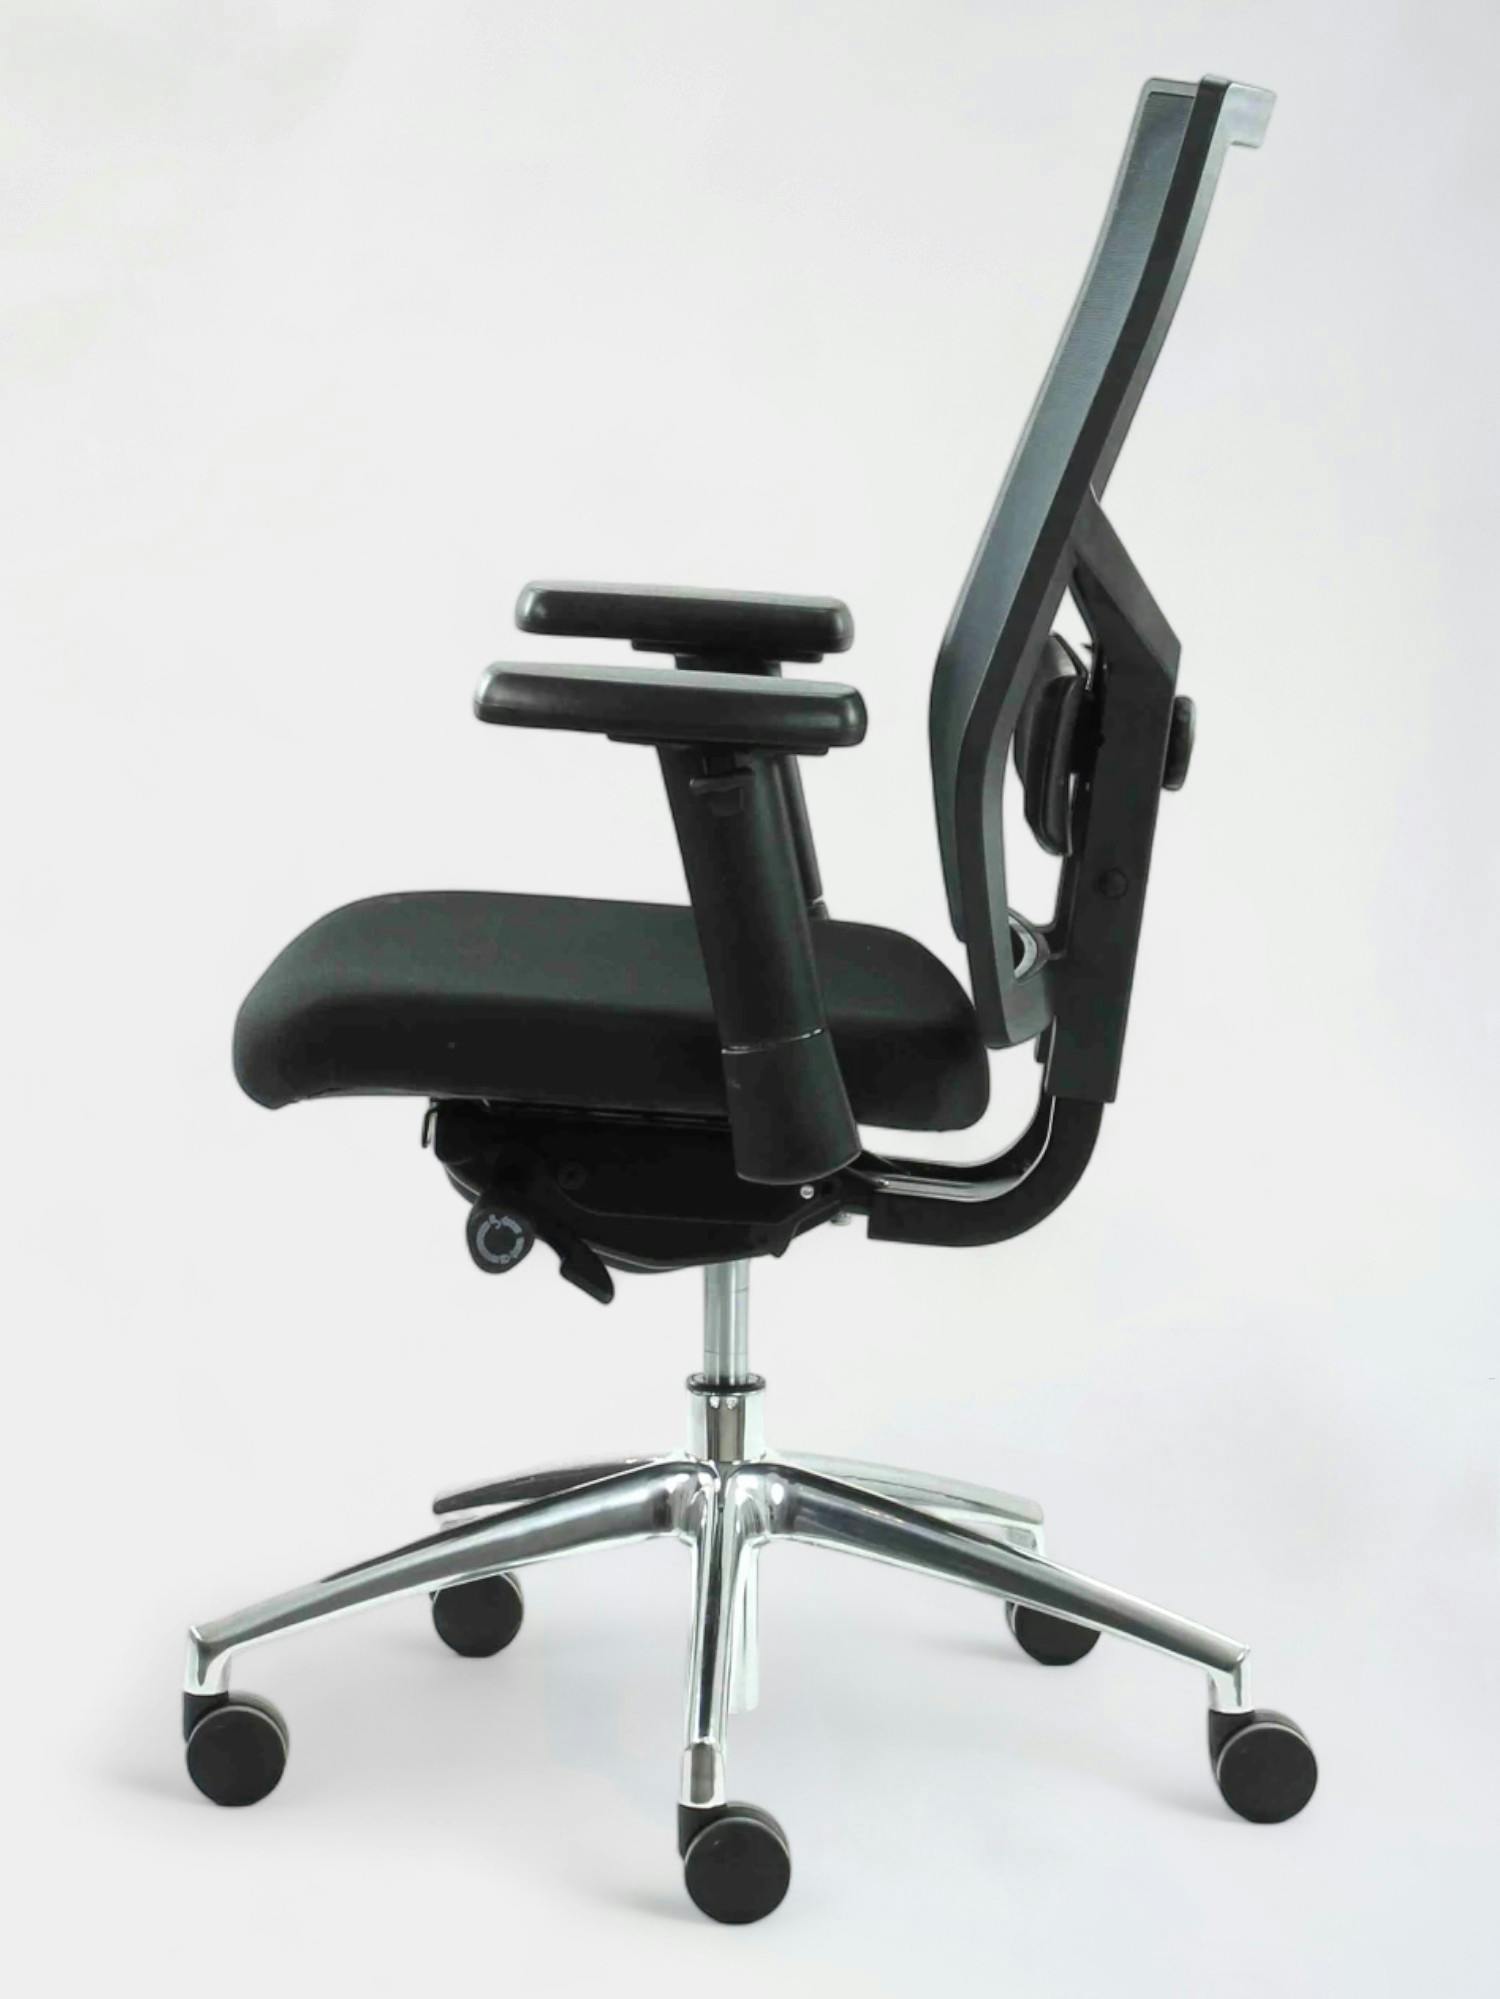 Office chair 8910 - Relieve Furniture